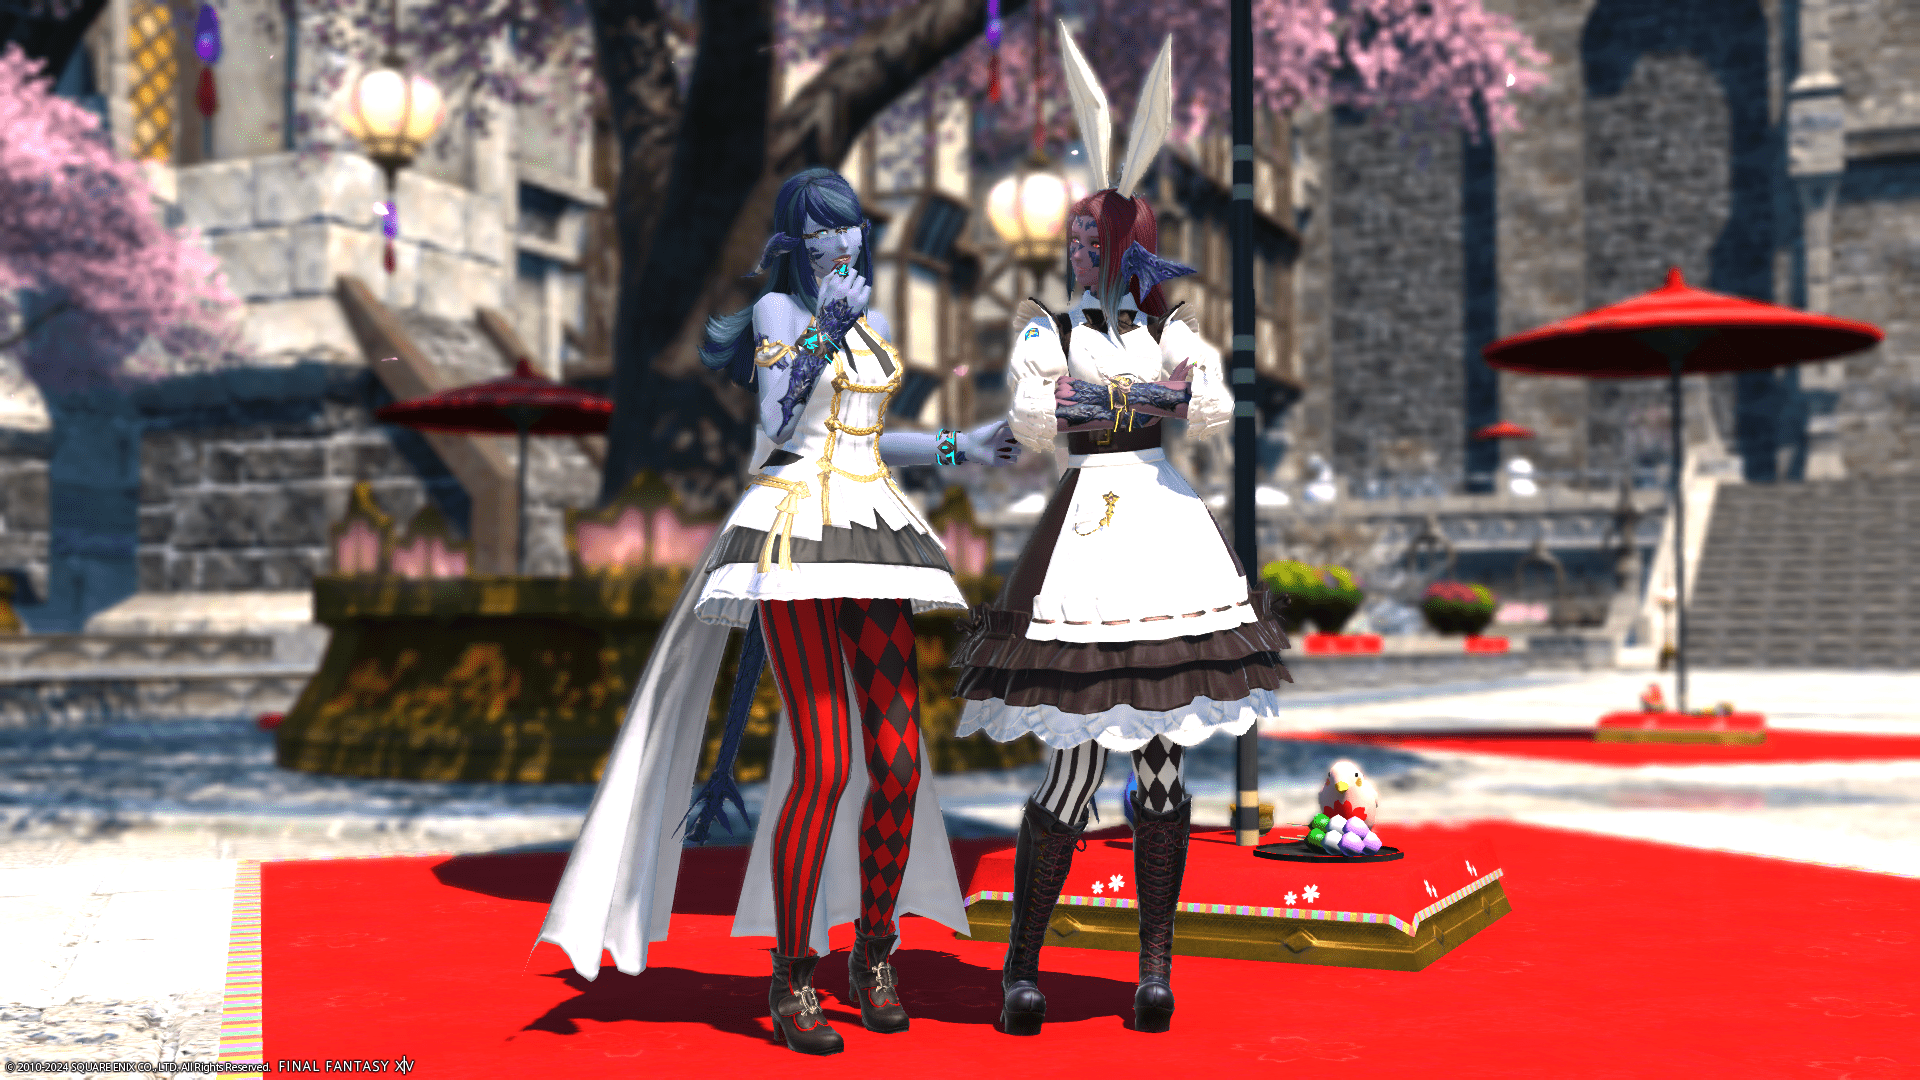 Laureine and Lizicus dressed up for the Little Ladies' Day & Hatching-Tide event. Standing in front of Little Ladies' Day decor.